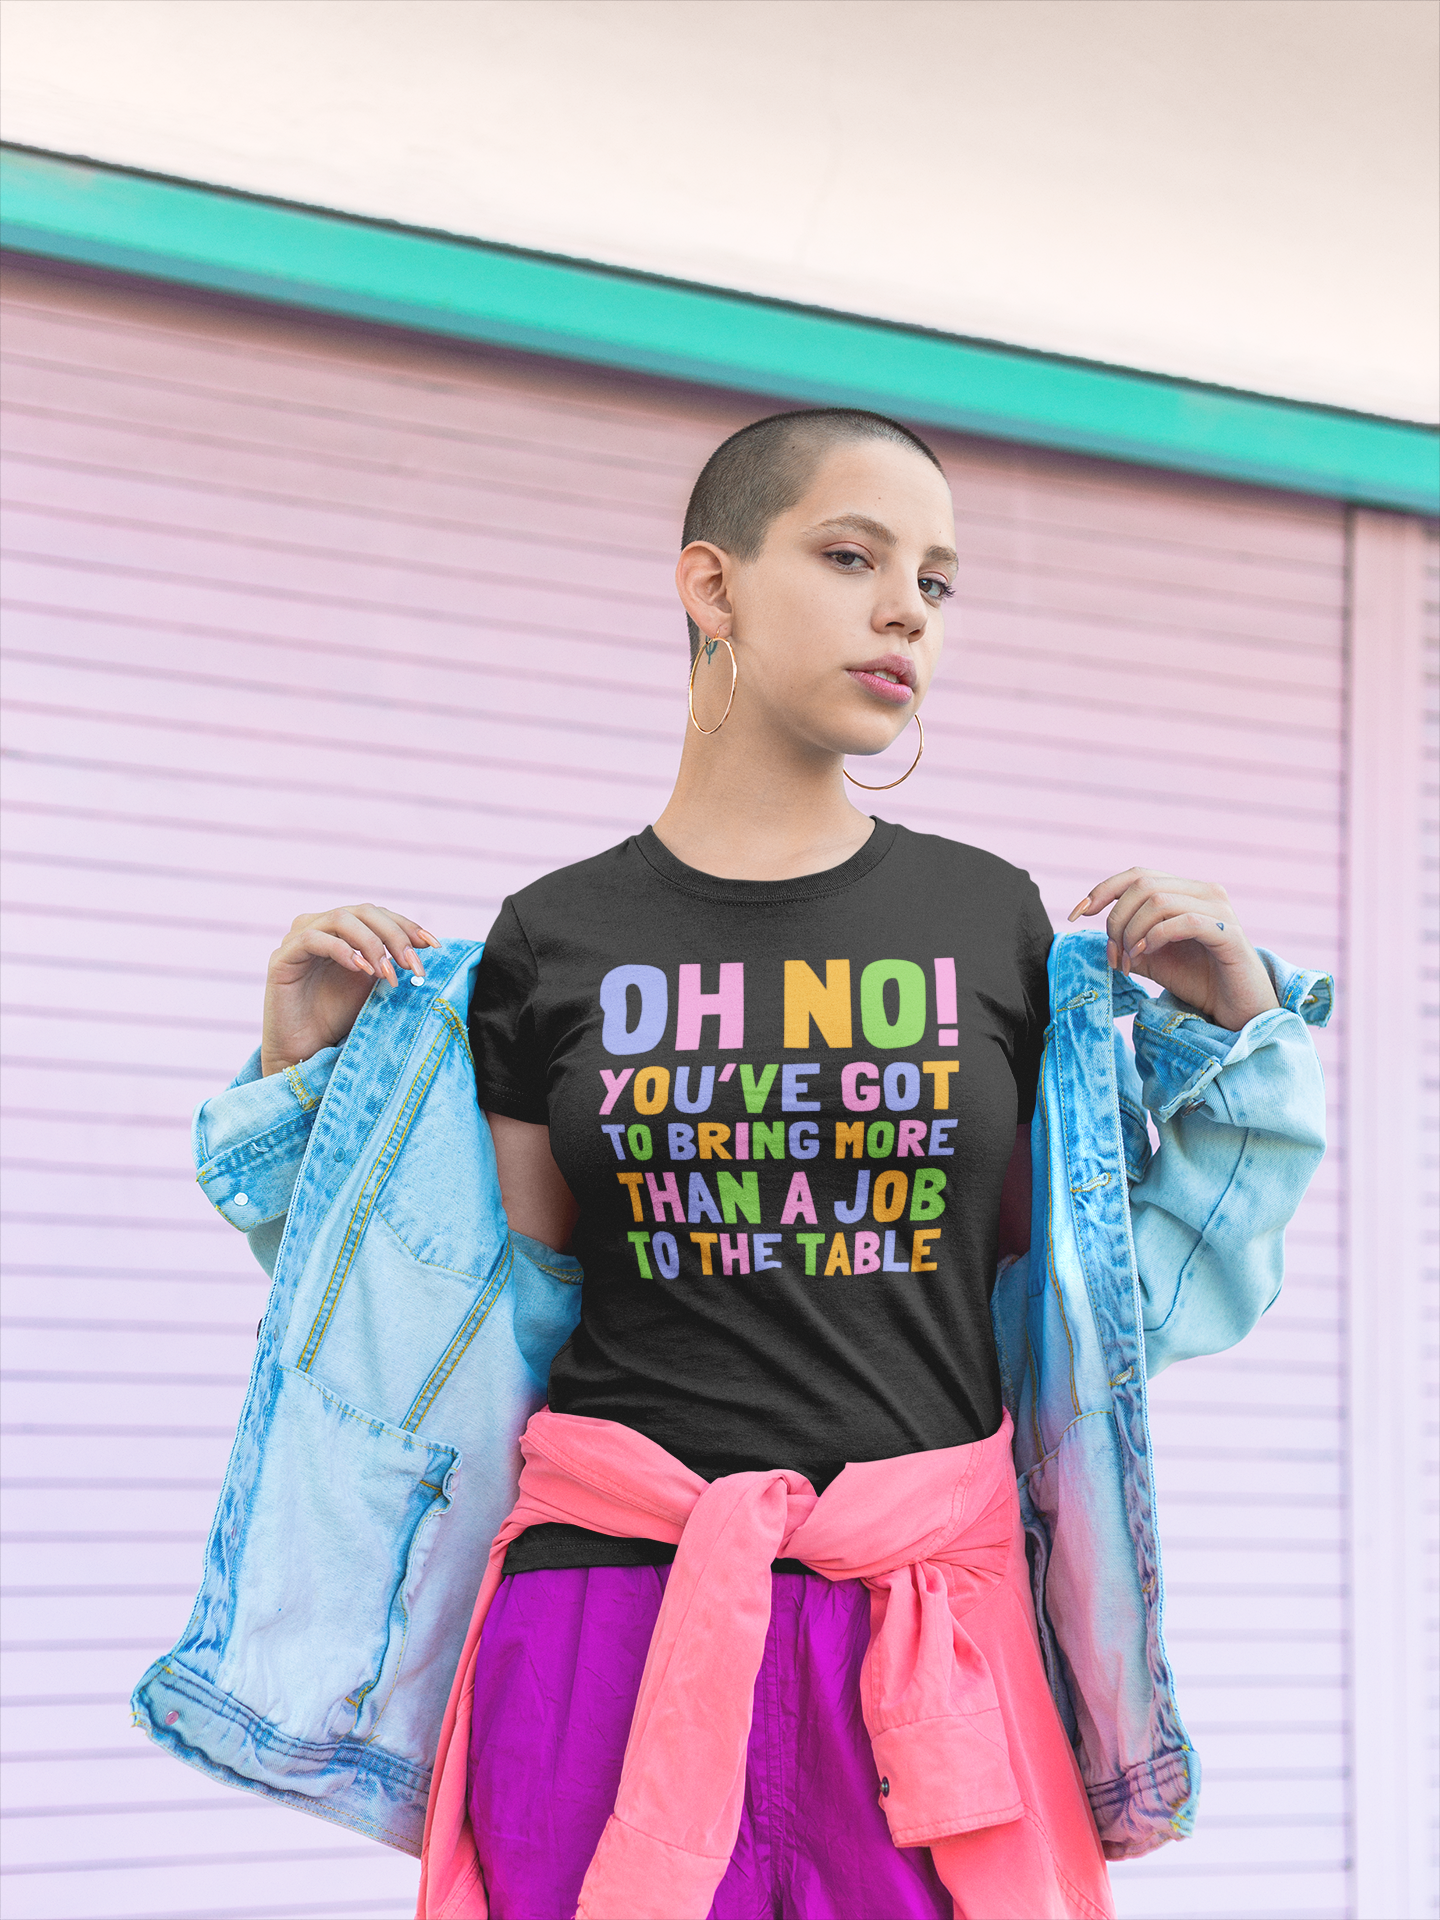 Oh No! You’ve Got To Bring More Than A Job To The Table Unisex Feminist T-shirt - Shop Women’s Rights T-shirts - Feminist Trash Store - Women’s Black T-shirt